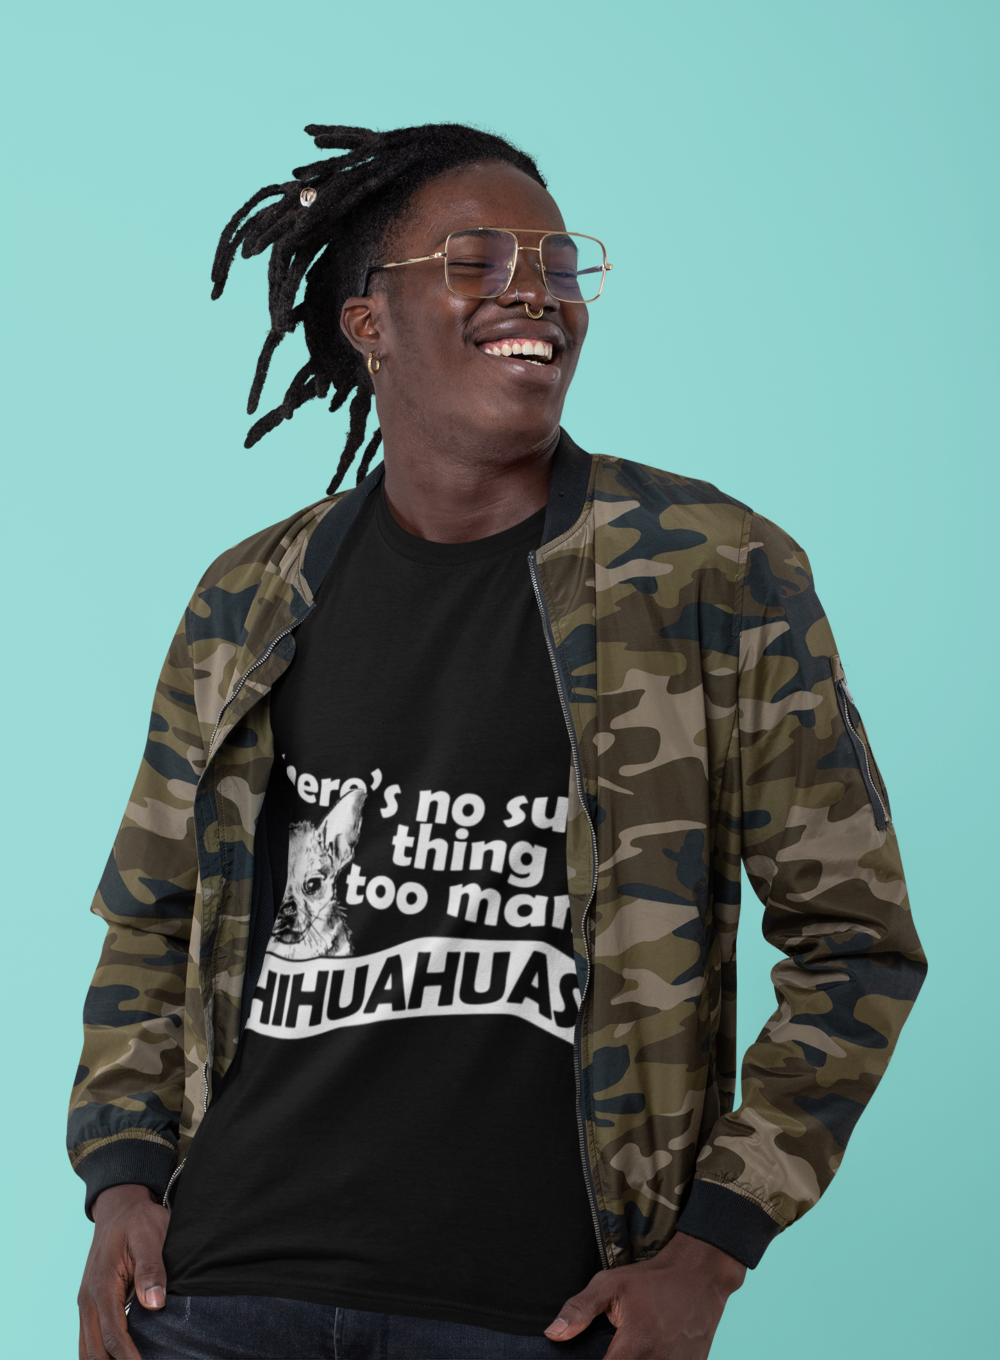 t shirt mockup featuring a smiling man with retro glasses at a studio 30545